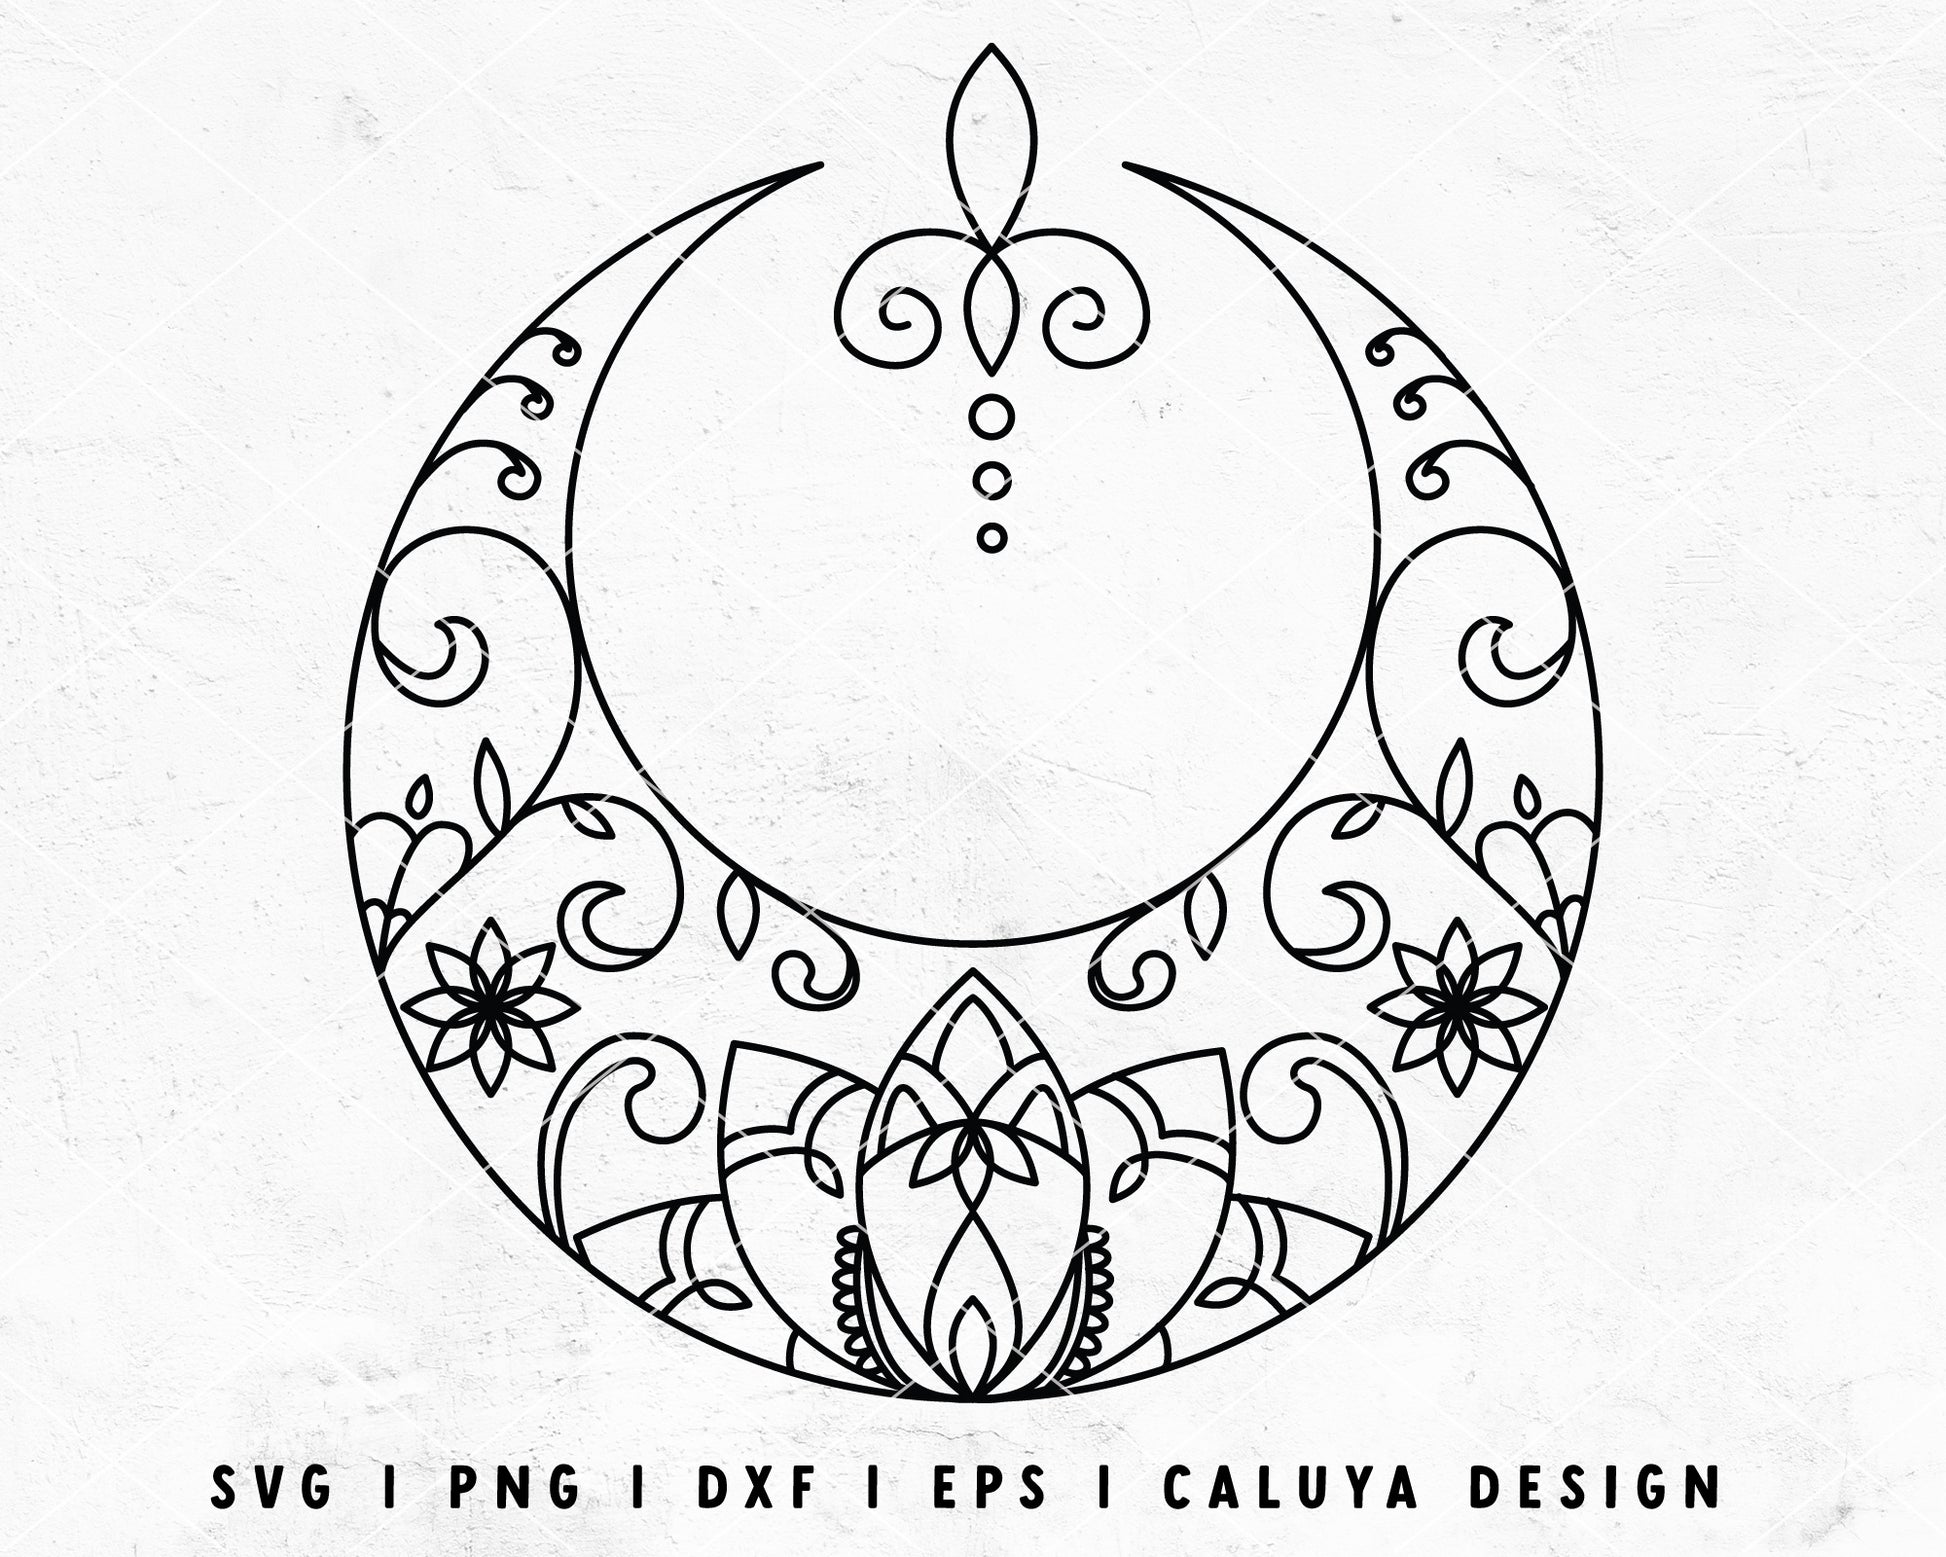 FREE Moon SVG | Floral SVG | Zentangle SVG Cut File for Cricut, Cameo Silhouette | Free SVG Cut File